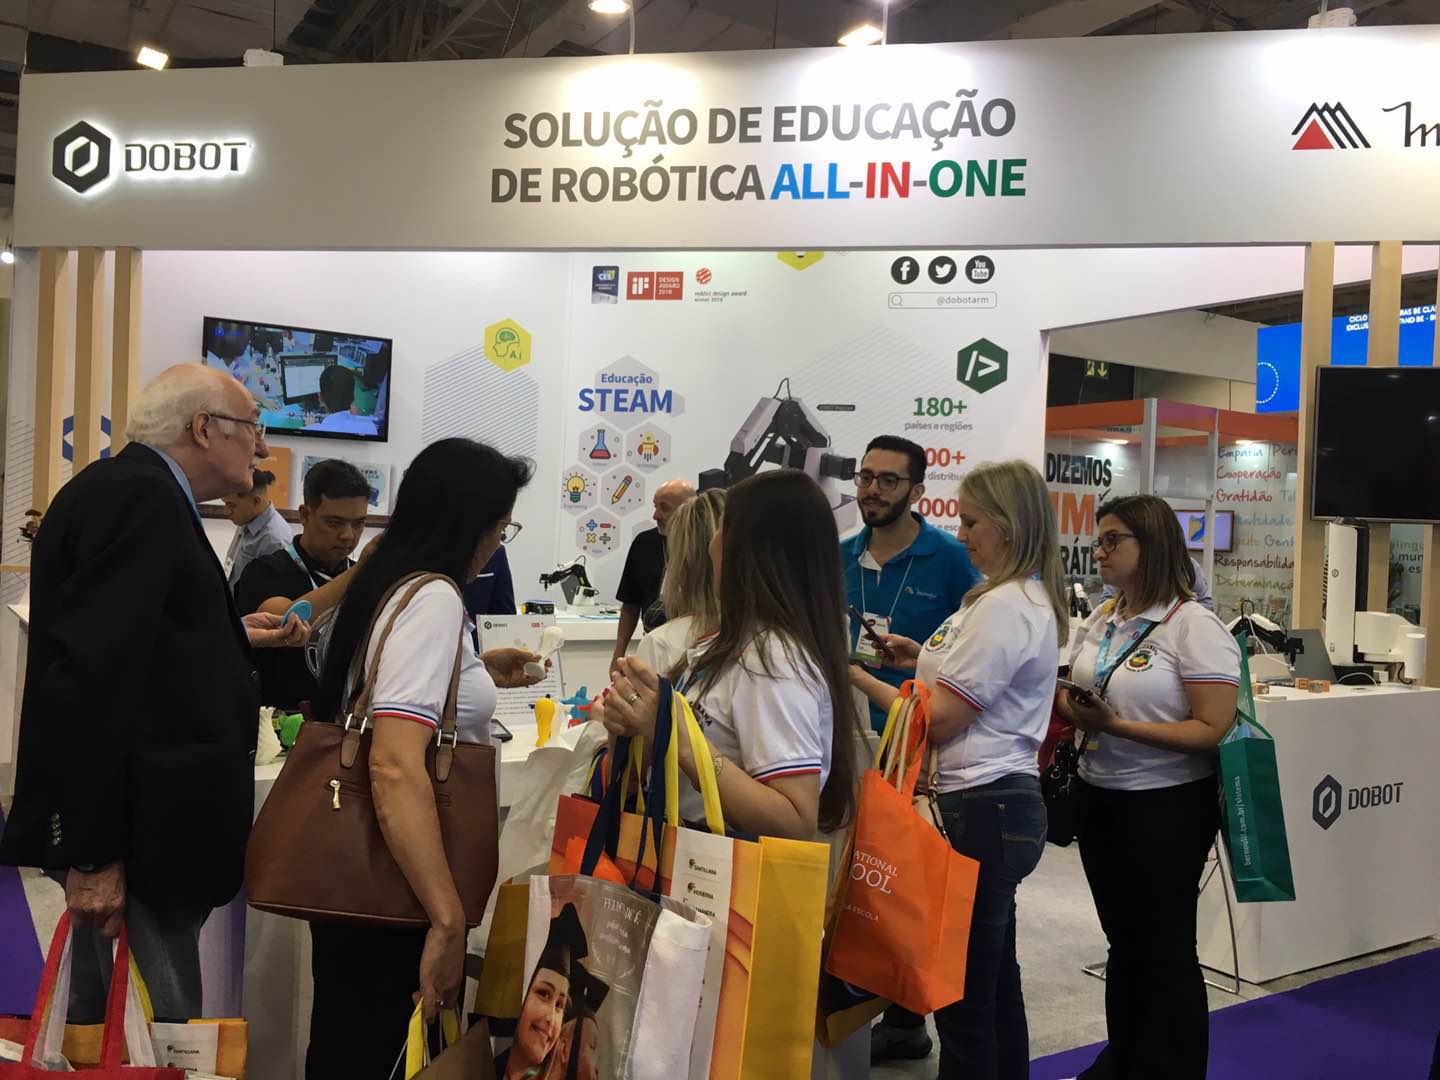 Education 4.0 Made Simple with Dobot at Bett Educar 2019